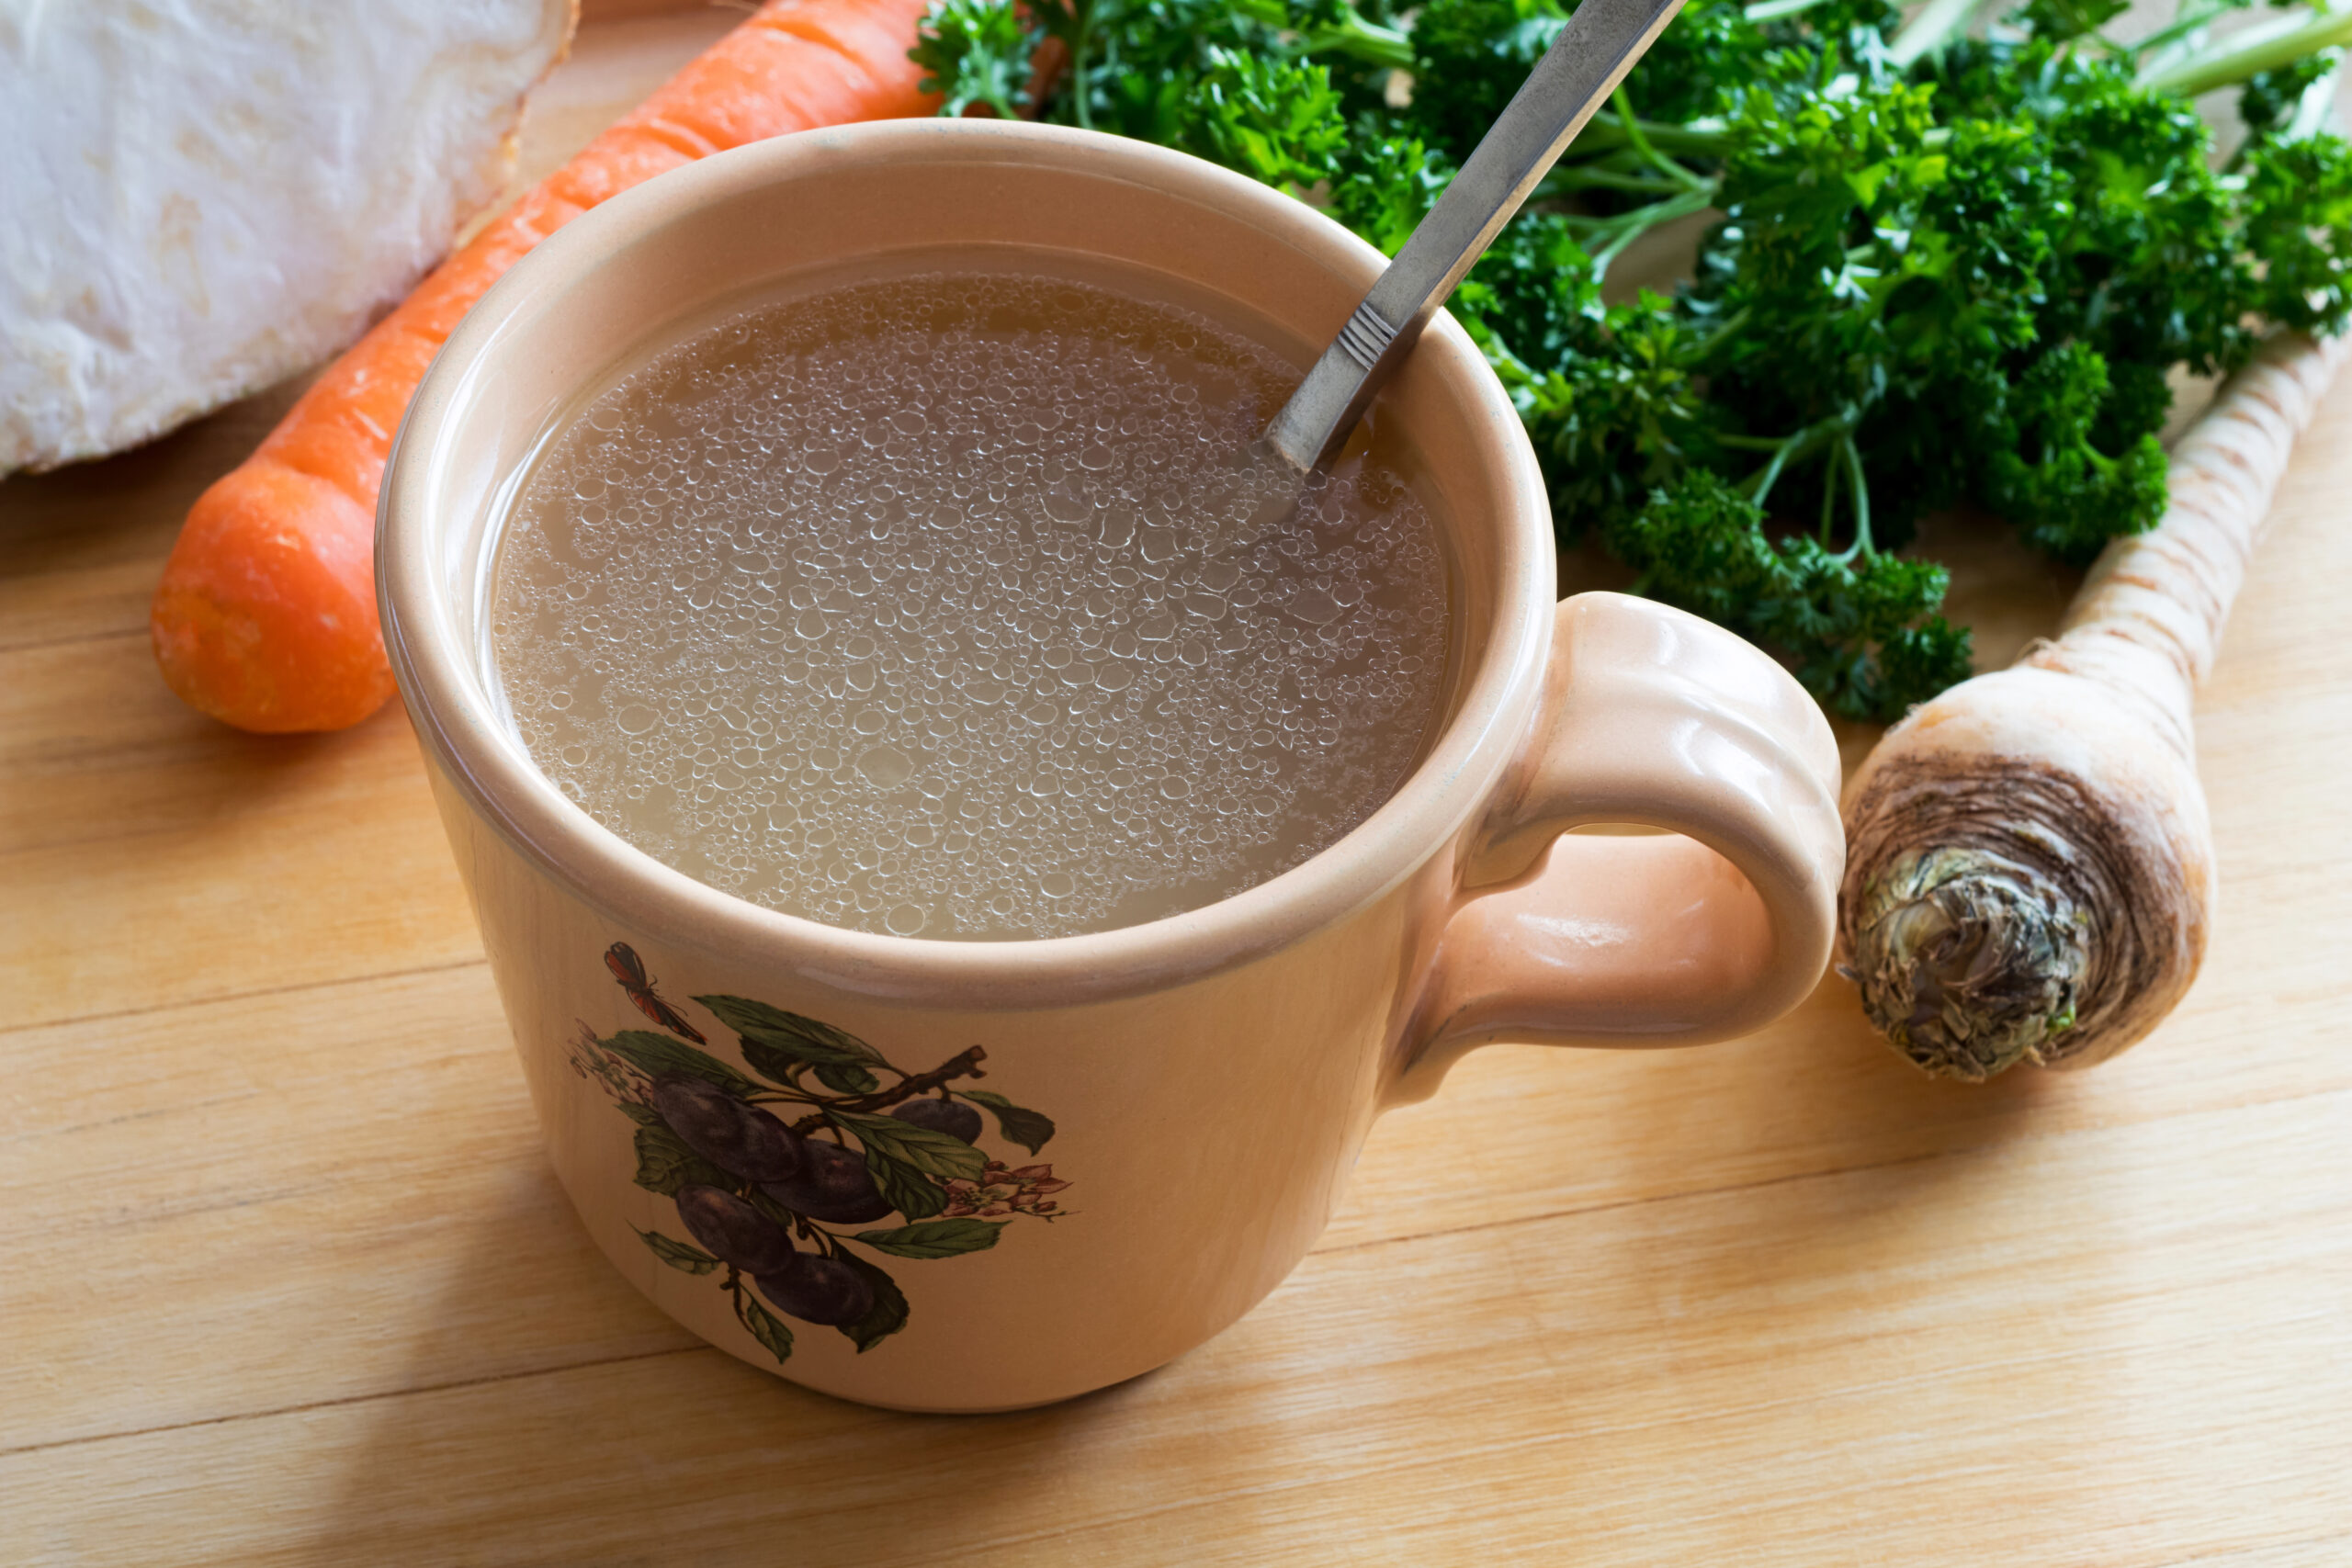 Bone broth: a miraculous health tonic, or just a crock of soup?